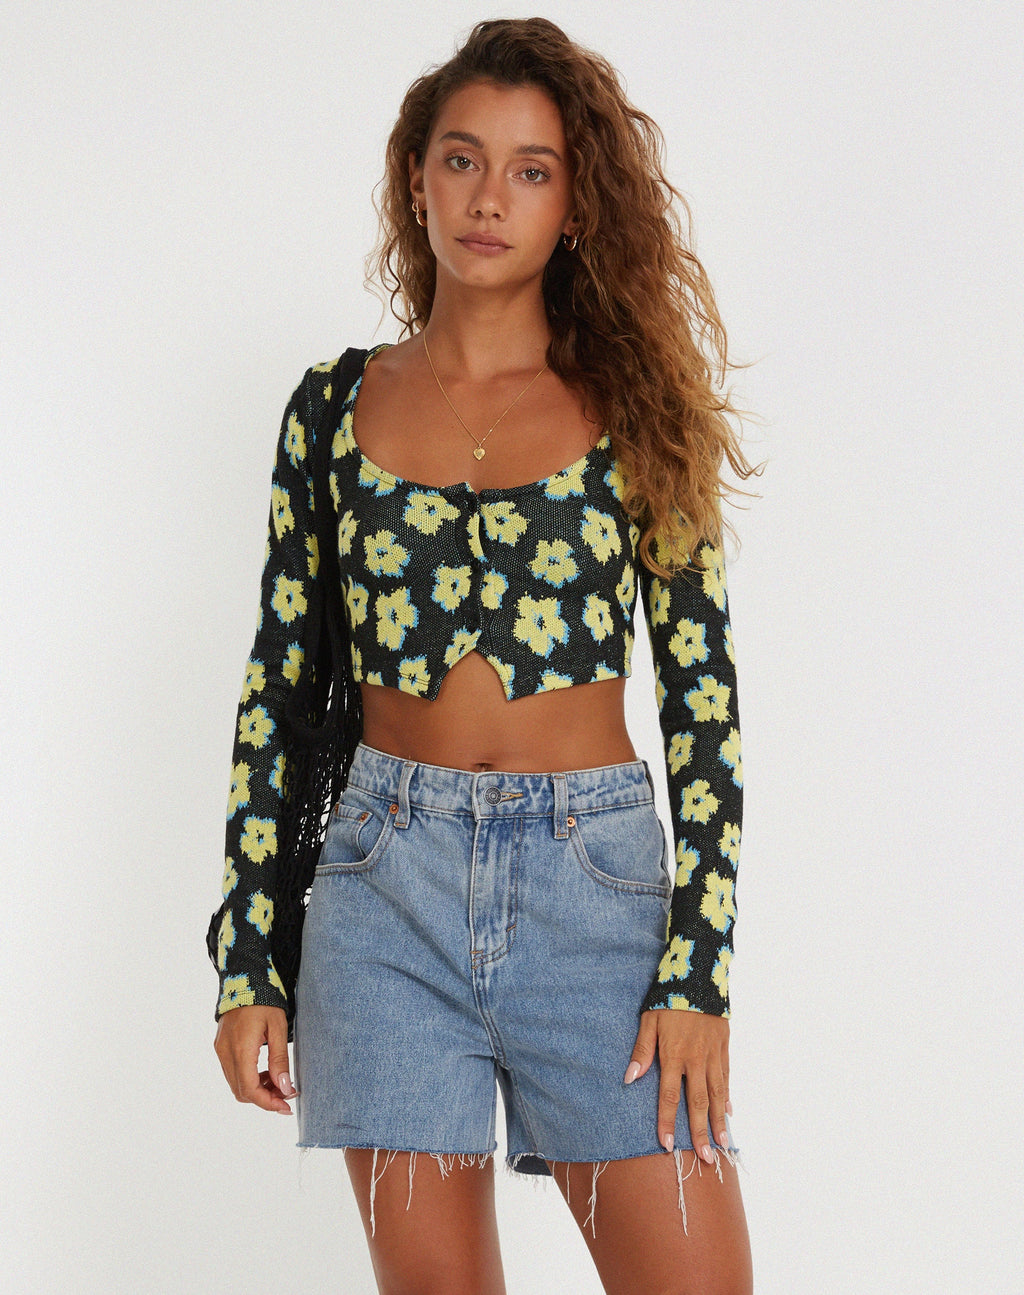 Faline Crop Top in Cute Floral Black and Yellow